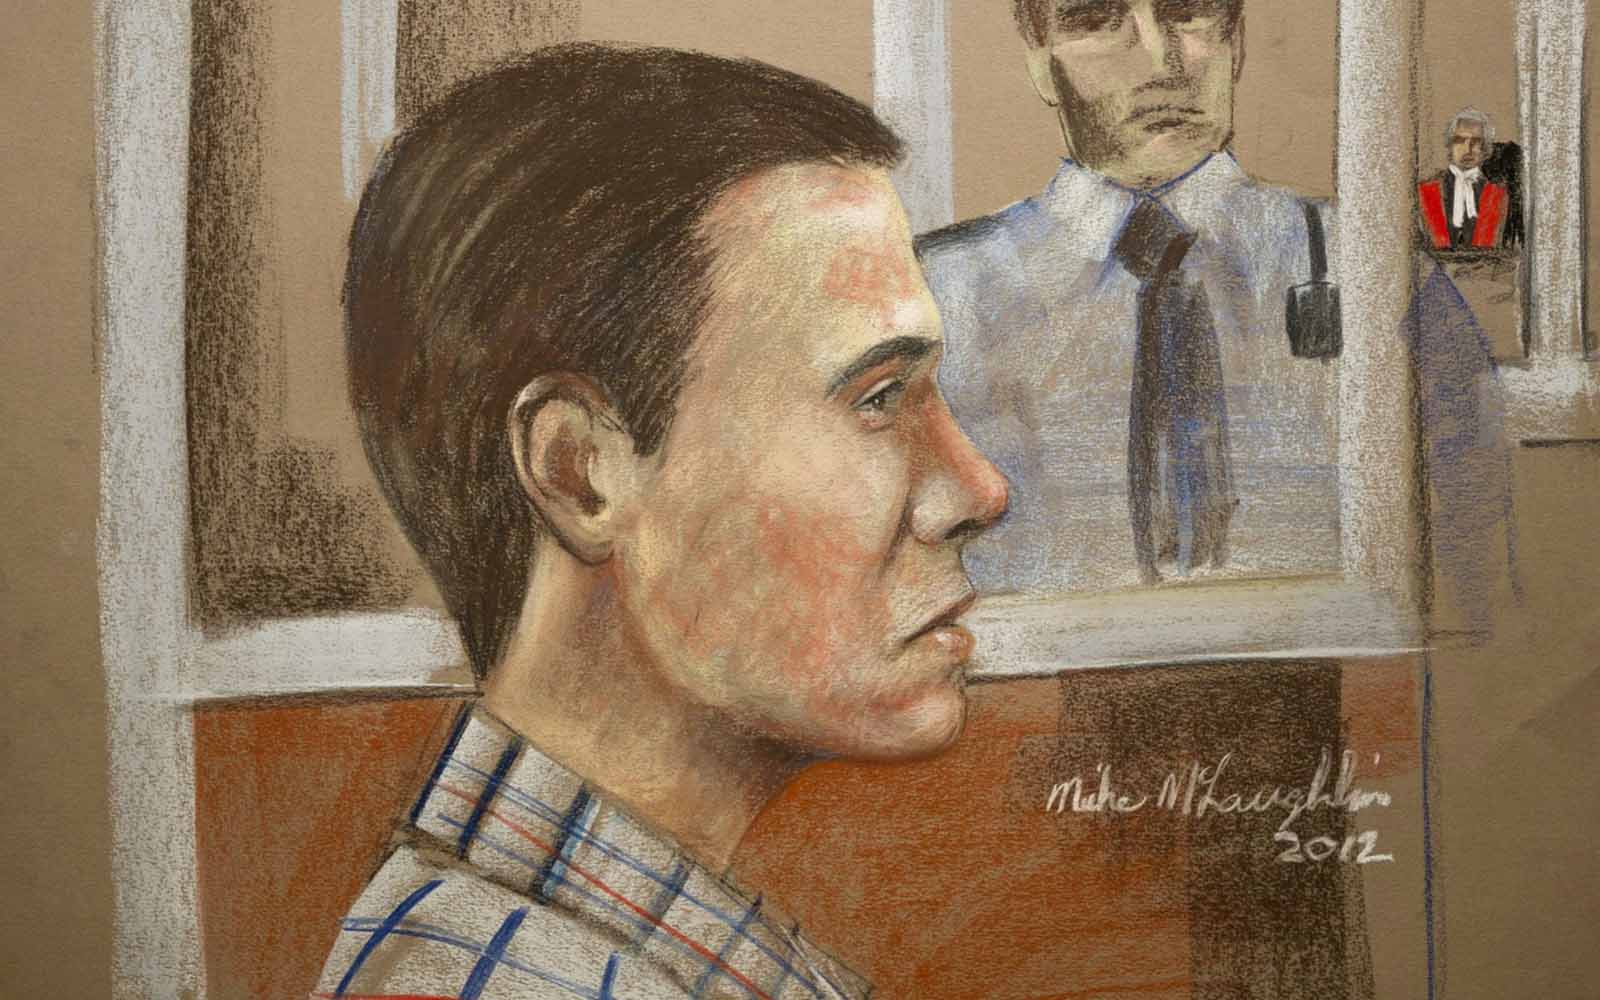 You may know Luka Magnotta's name thanks to the Netflix series 'Don't F*** With Cats'. But Magnotta is much darker than just an animal abuser. 